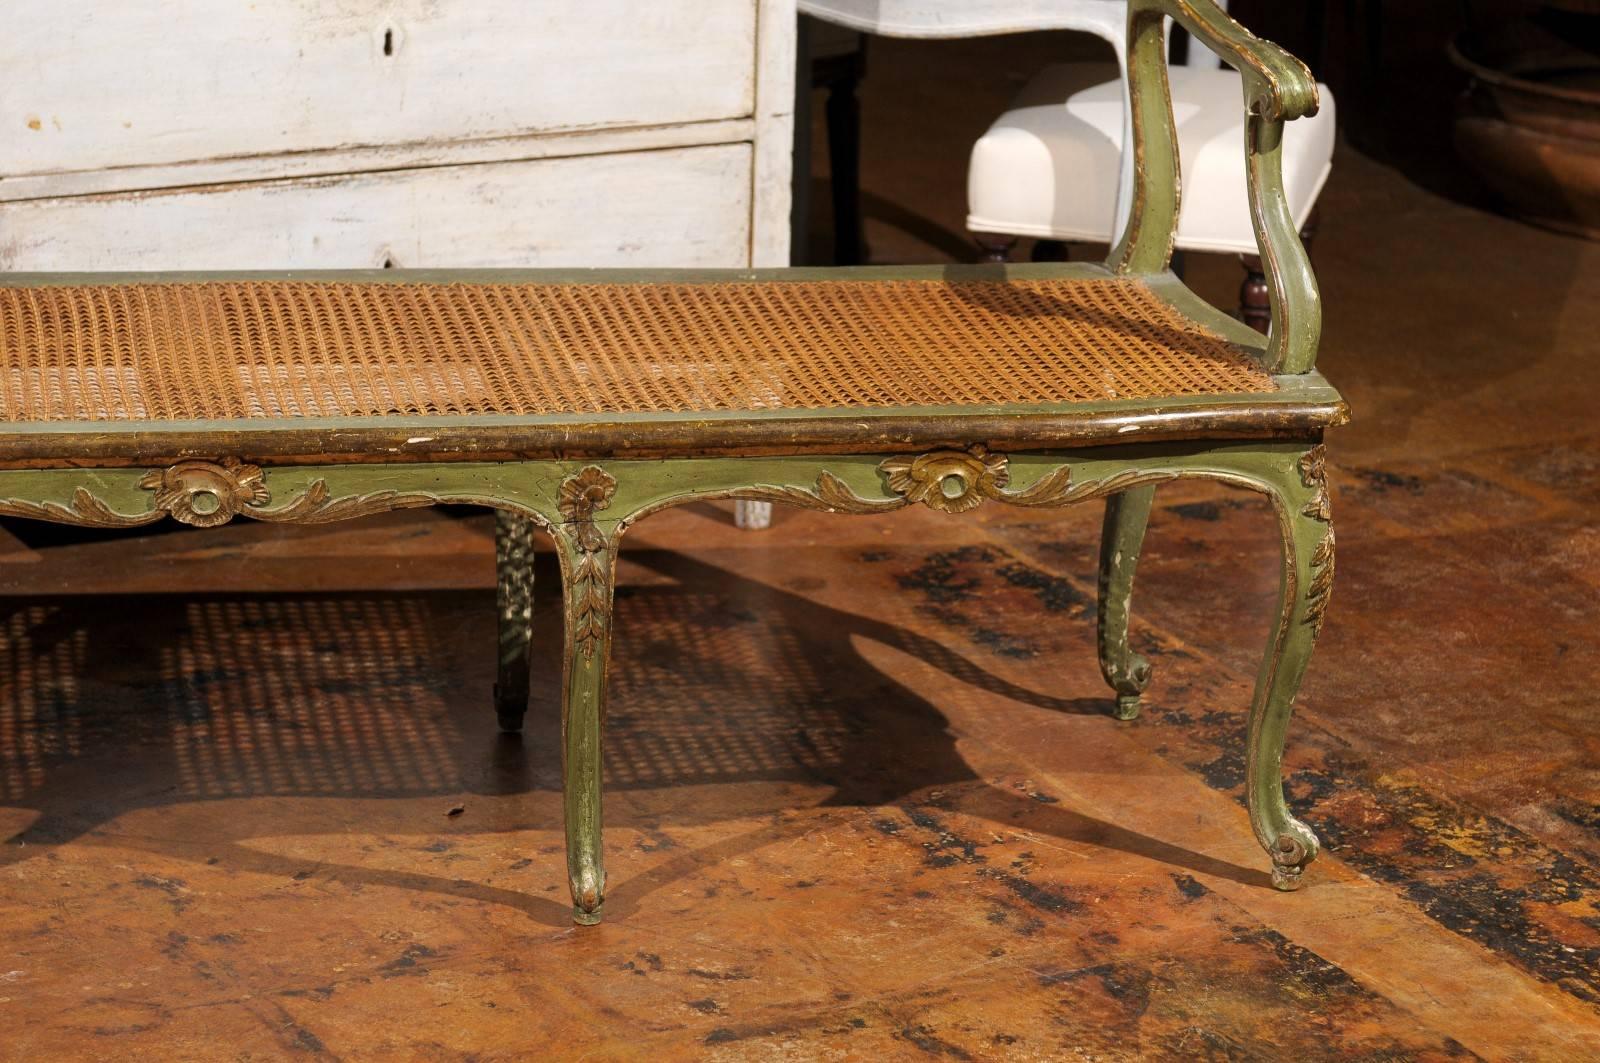 Cane Late 18th Century or Early 19th Century Italian Gilt and Polychrome Bench For Sale